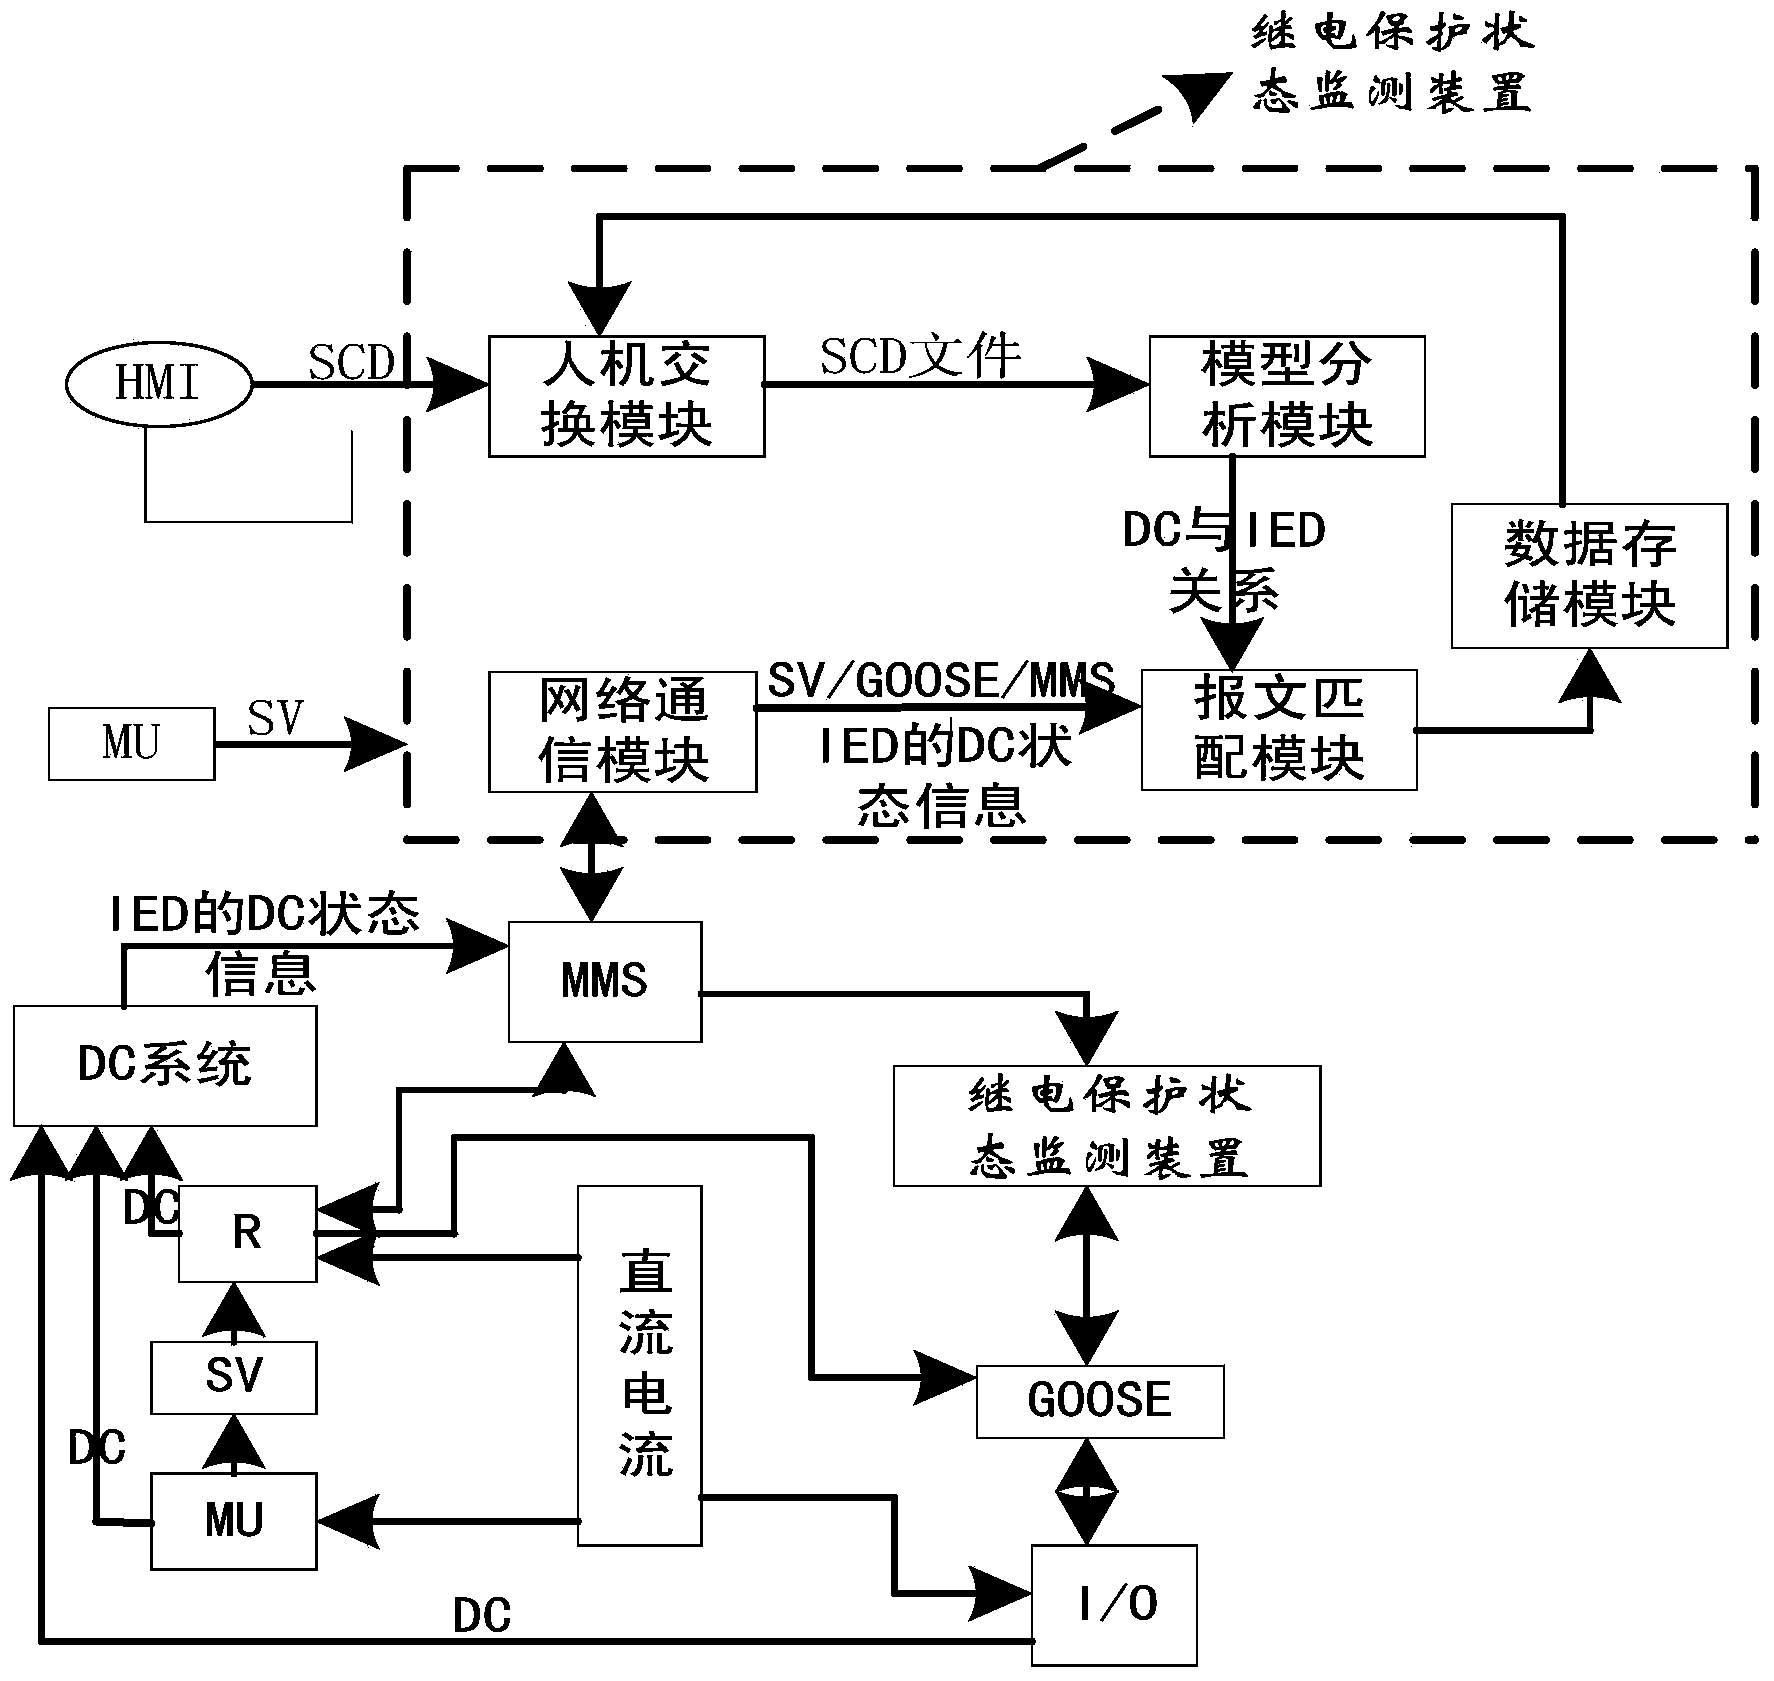 Substation relay protection direct current monitoring system based on substation configuration description (SCD) modeling